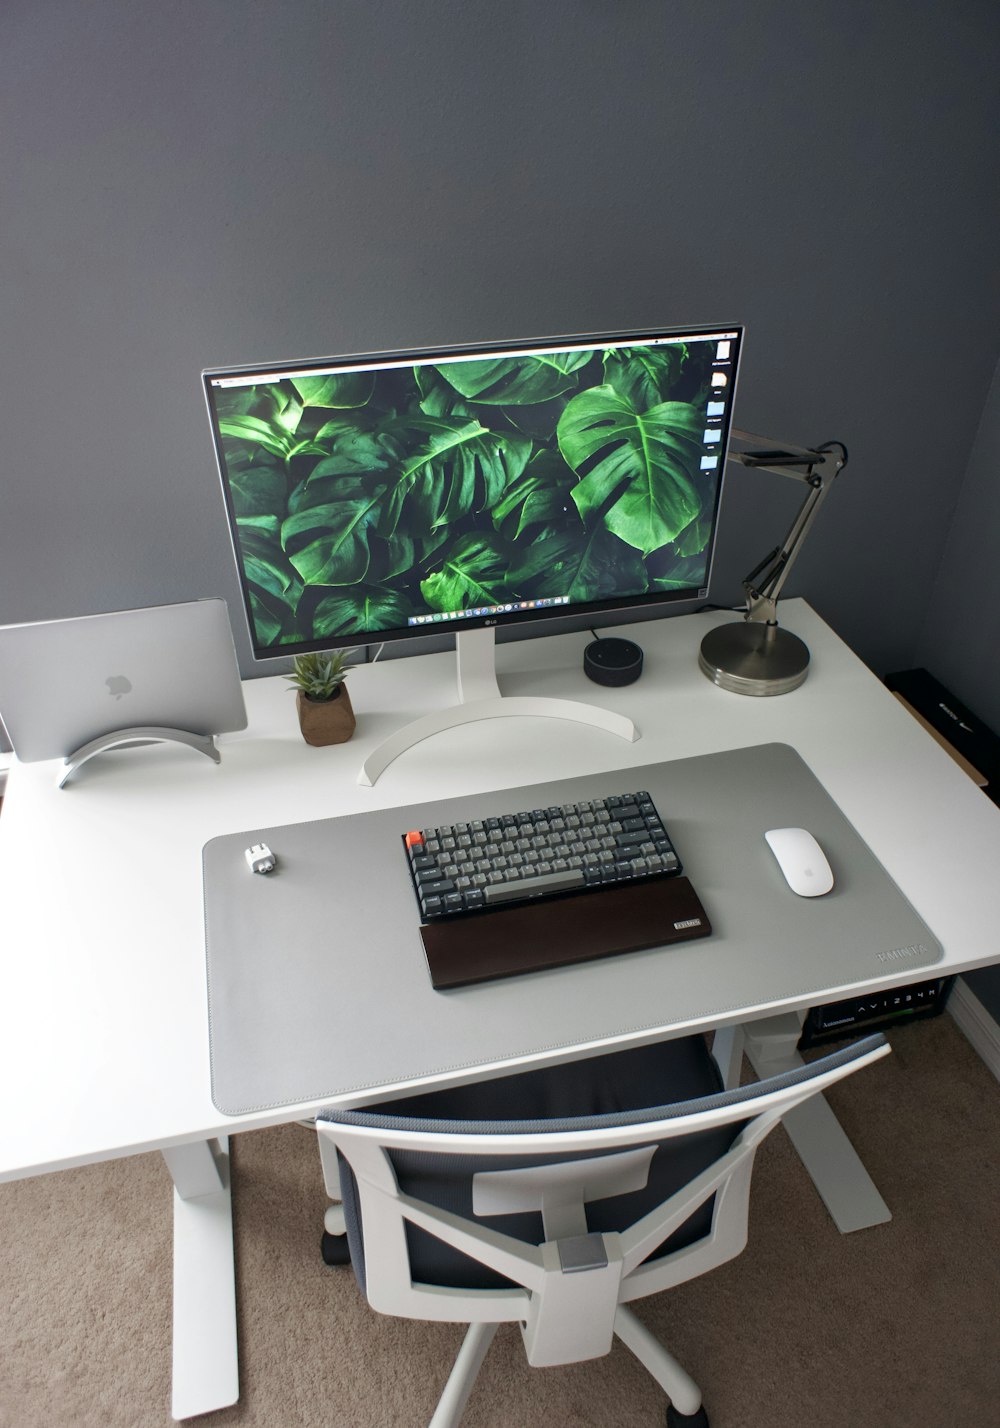 silver imac on white table